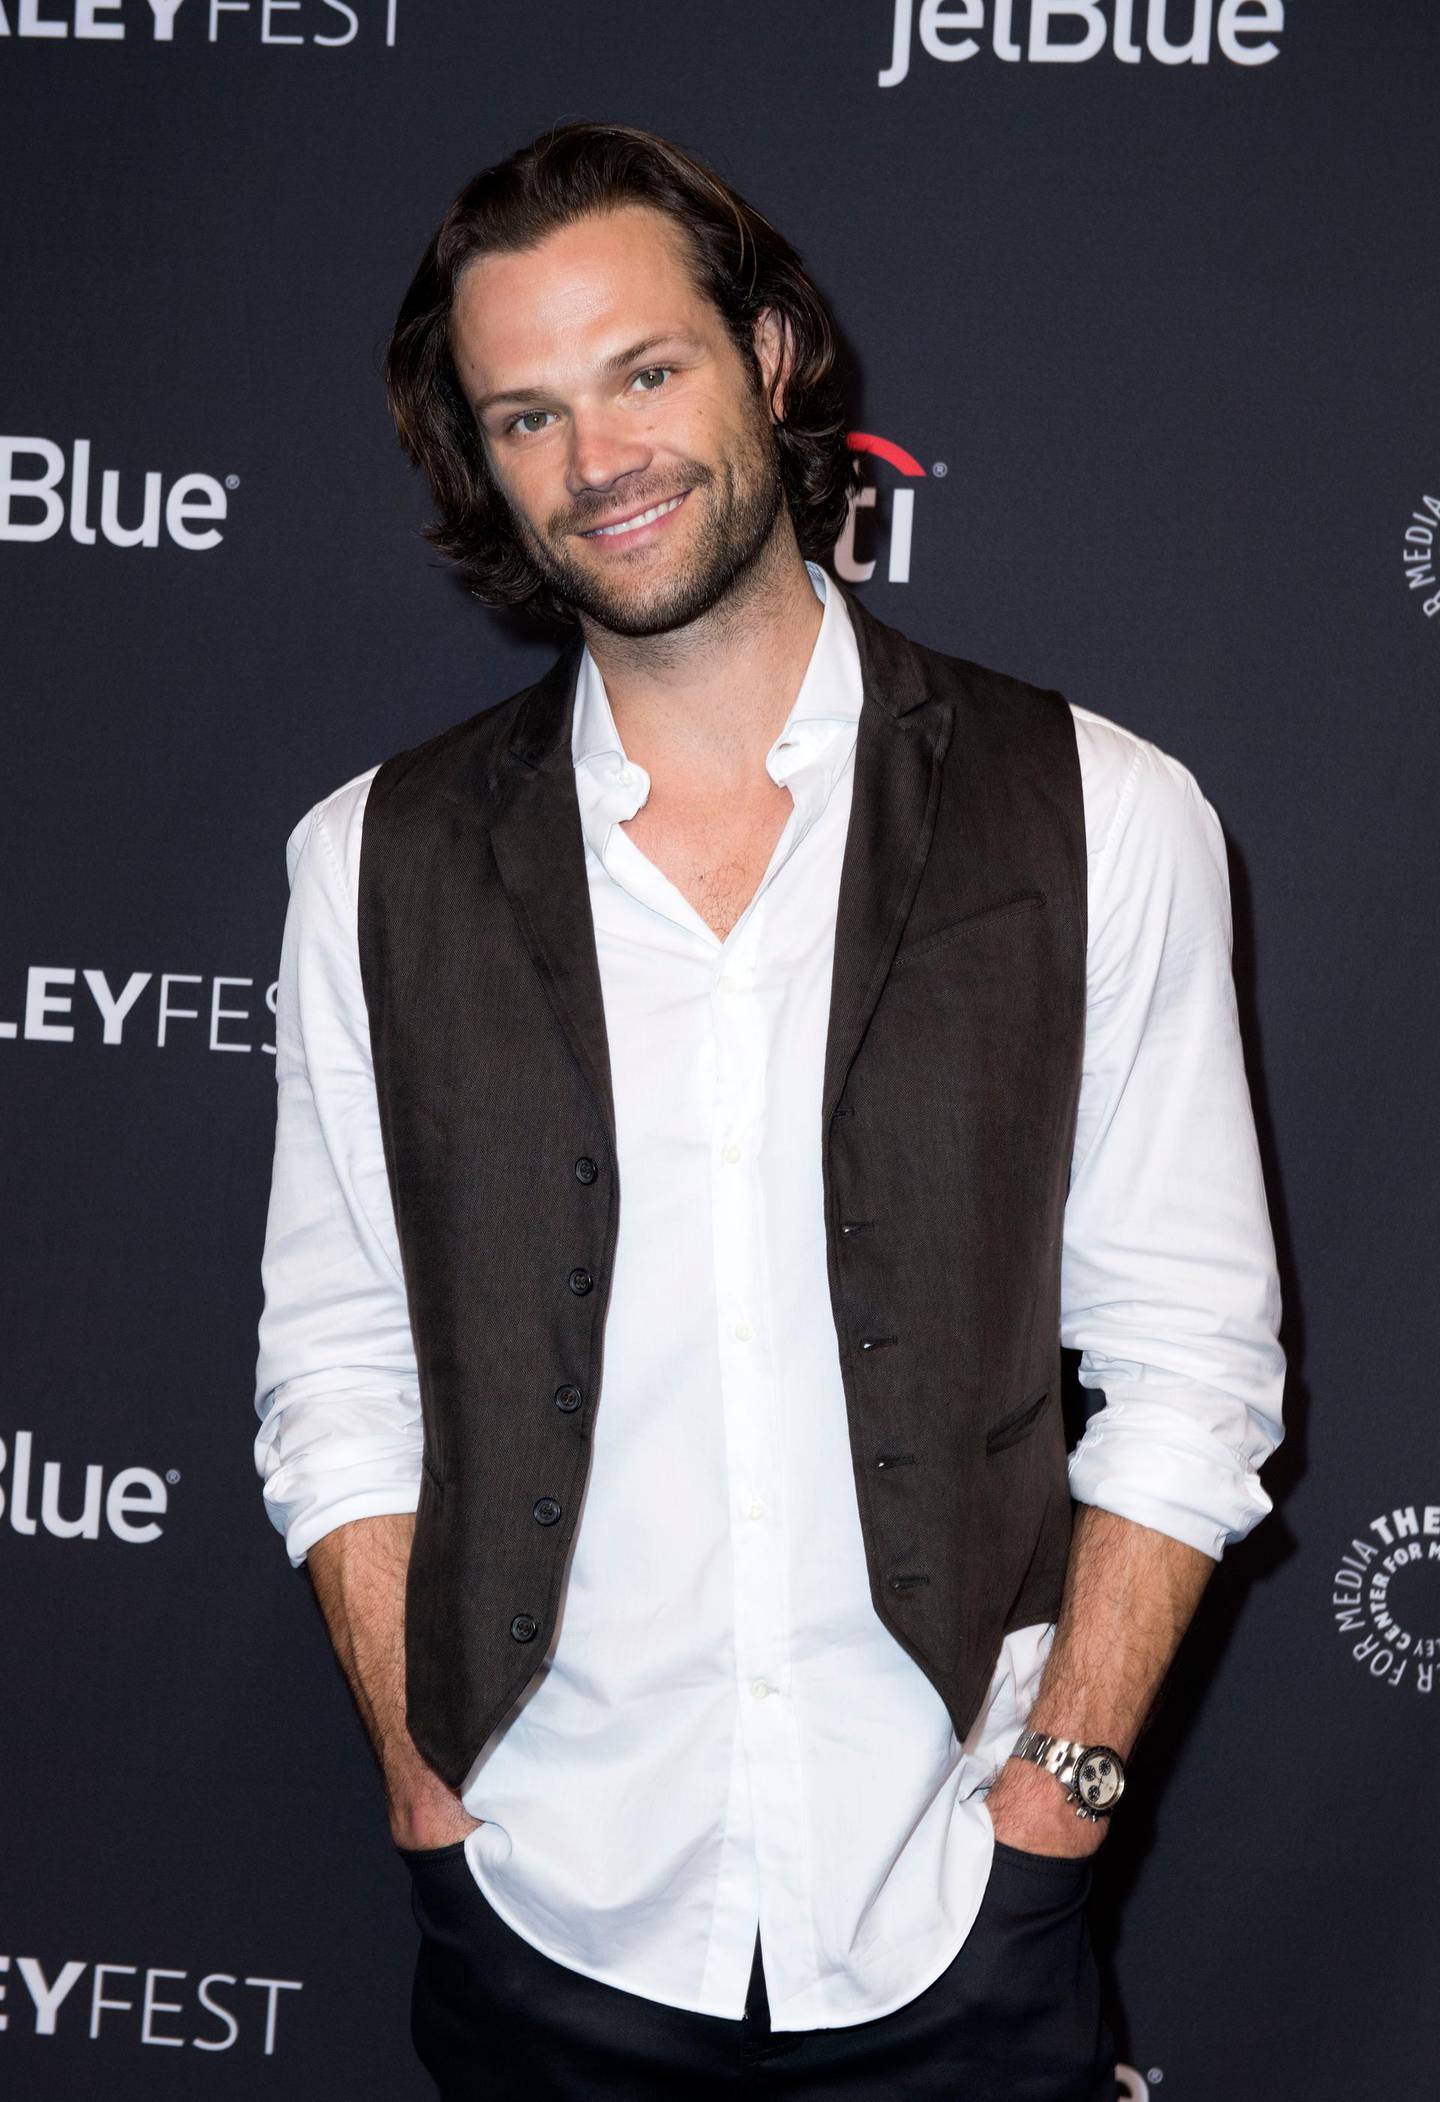 Actor Jared Padalecki attends The 2018 PaleyFest screening of CW's Supernatural at the Dolby Theater on March 20, 2018, in Hollywood, California. (Photo by VALERIE MACON / AFP)